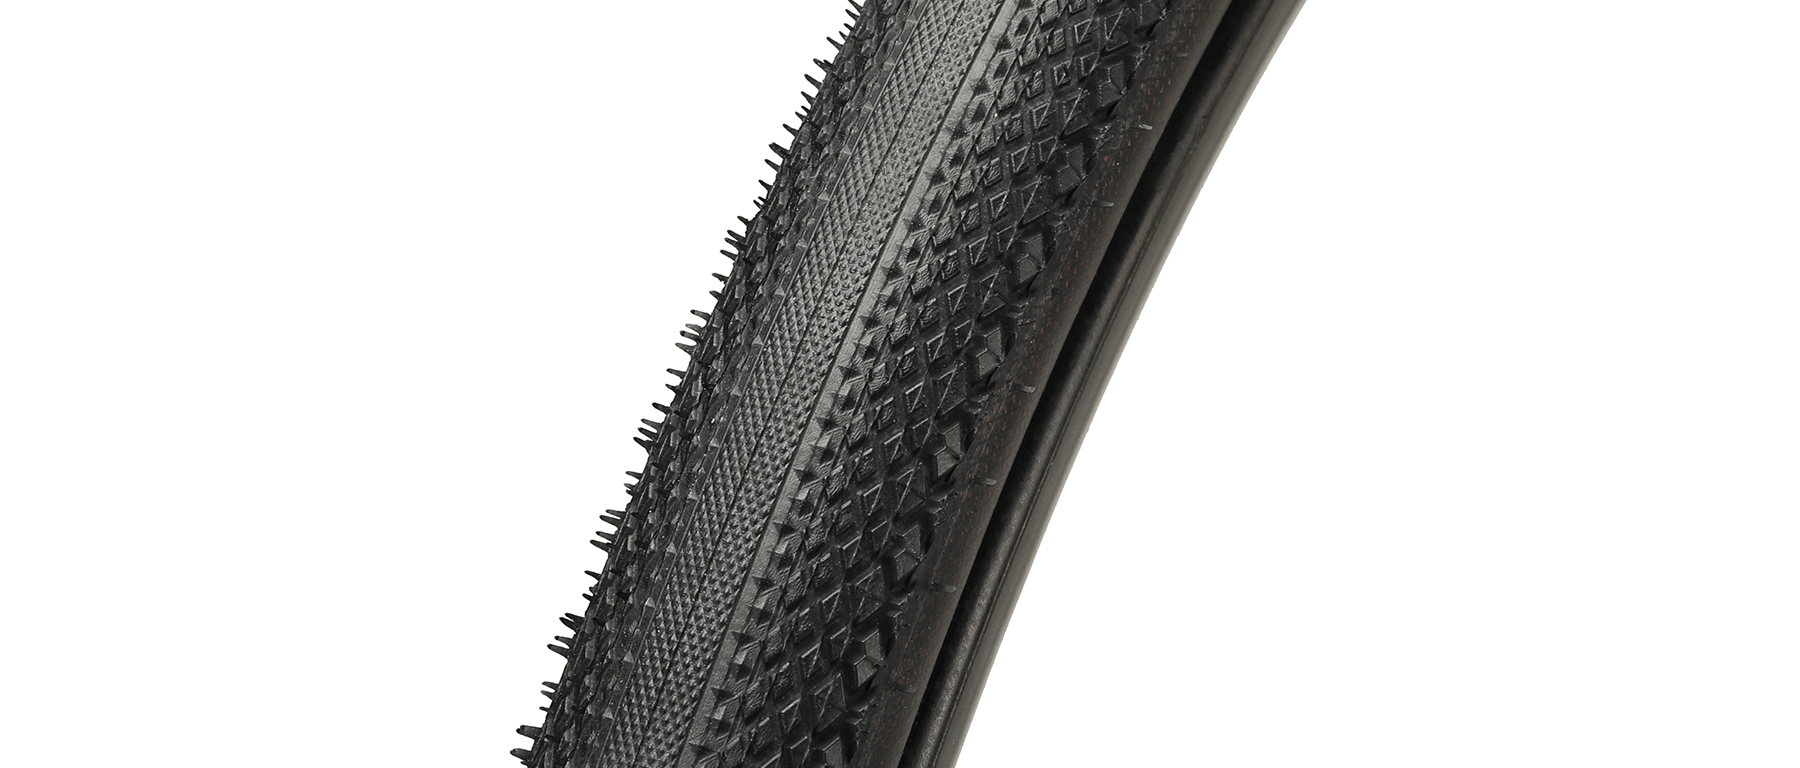 Hutchinson Overide Tubeless Tire OE 2-pack